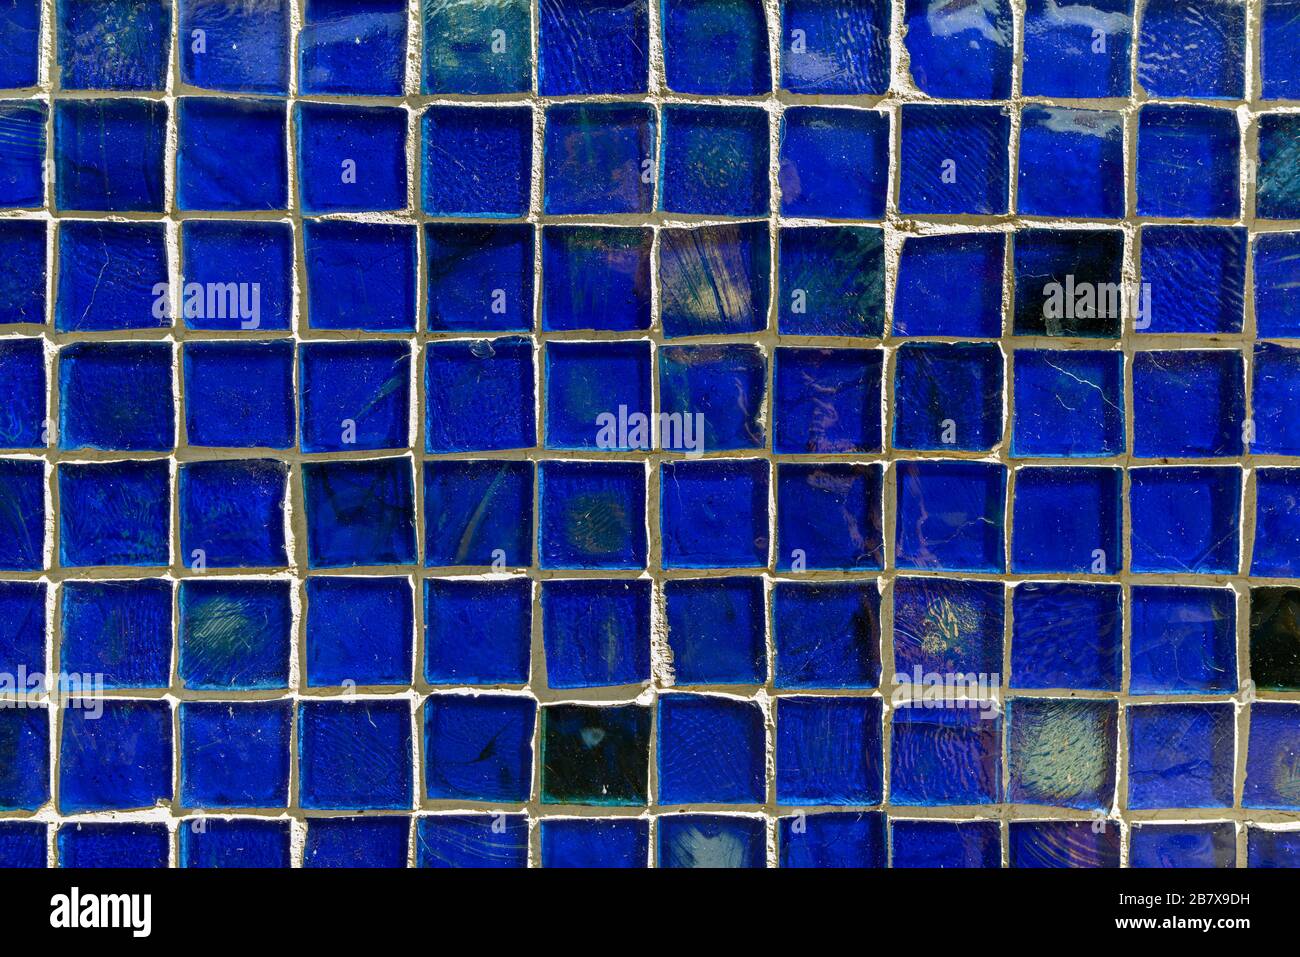 Abstract Background With Blue Tiles on Wall Stock Photo